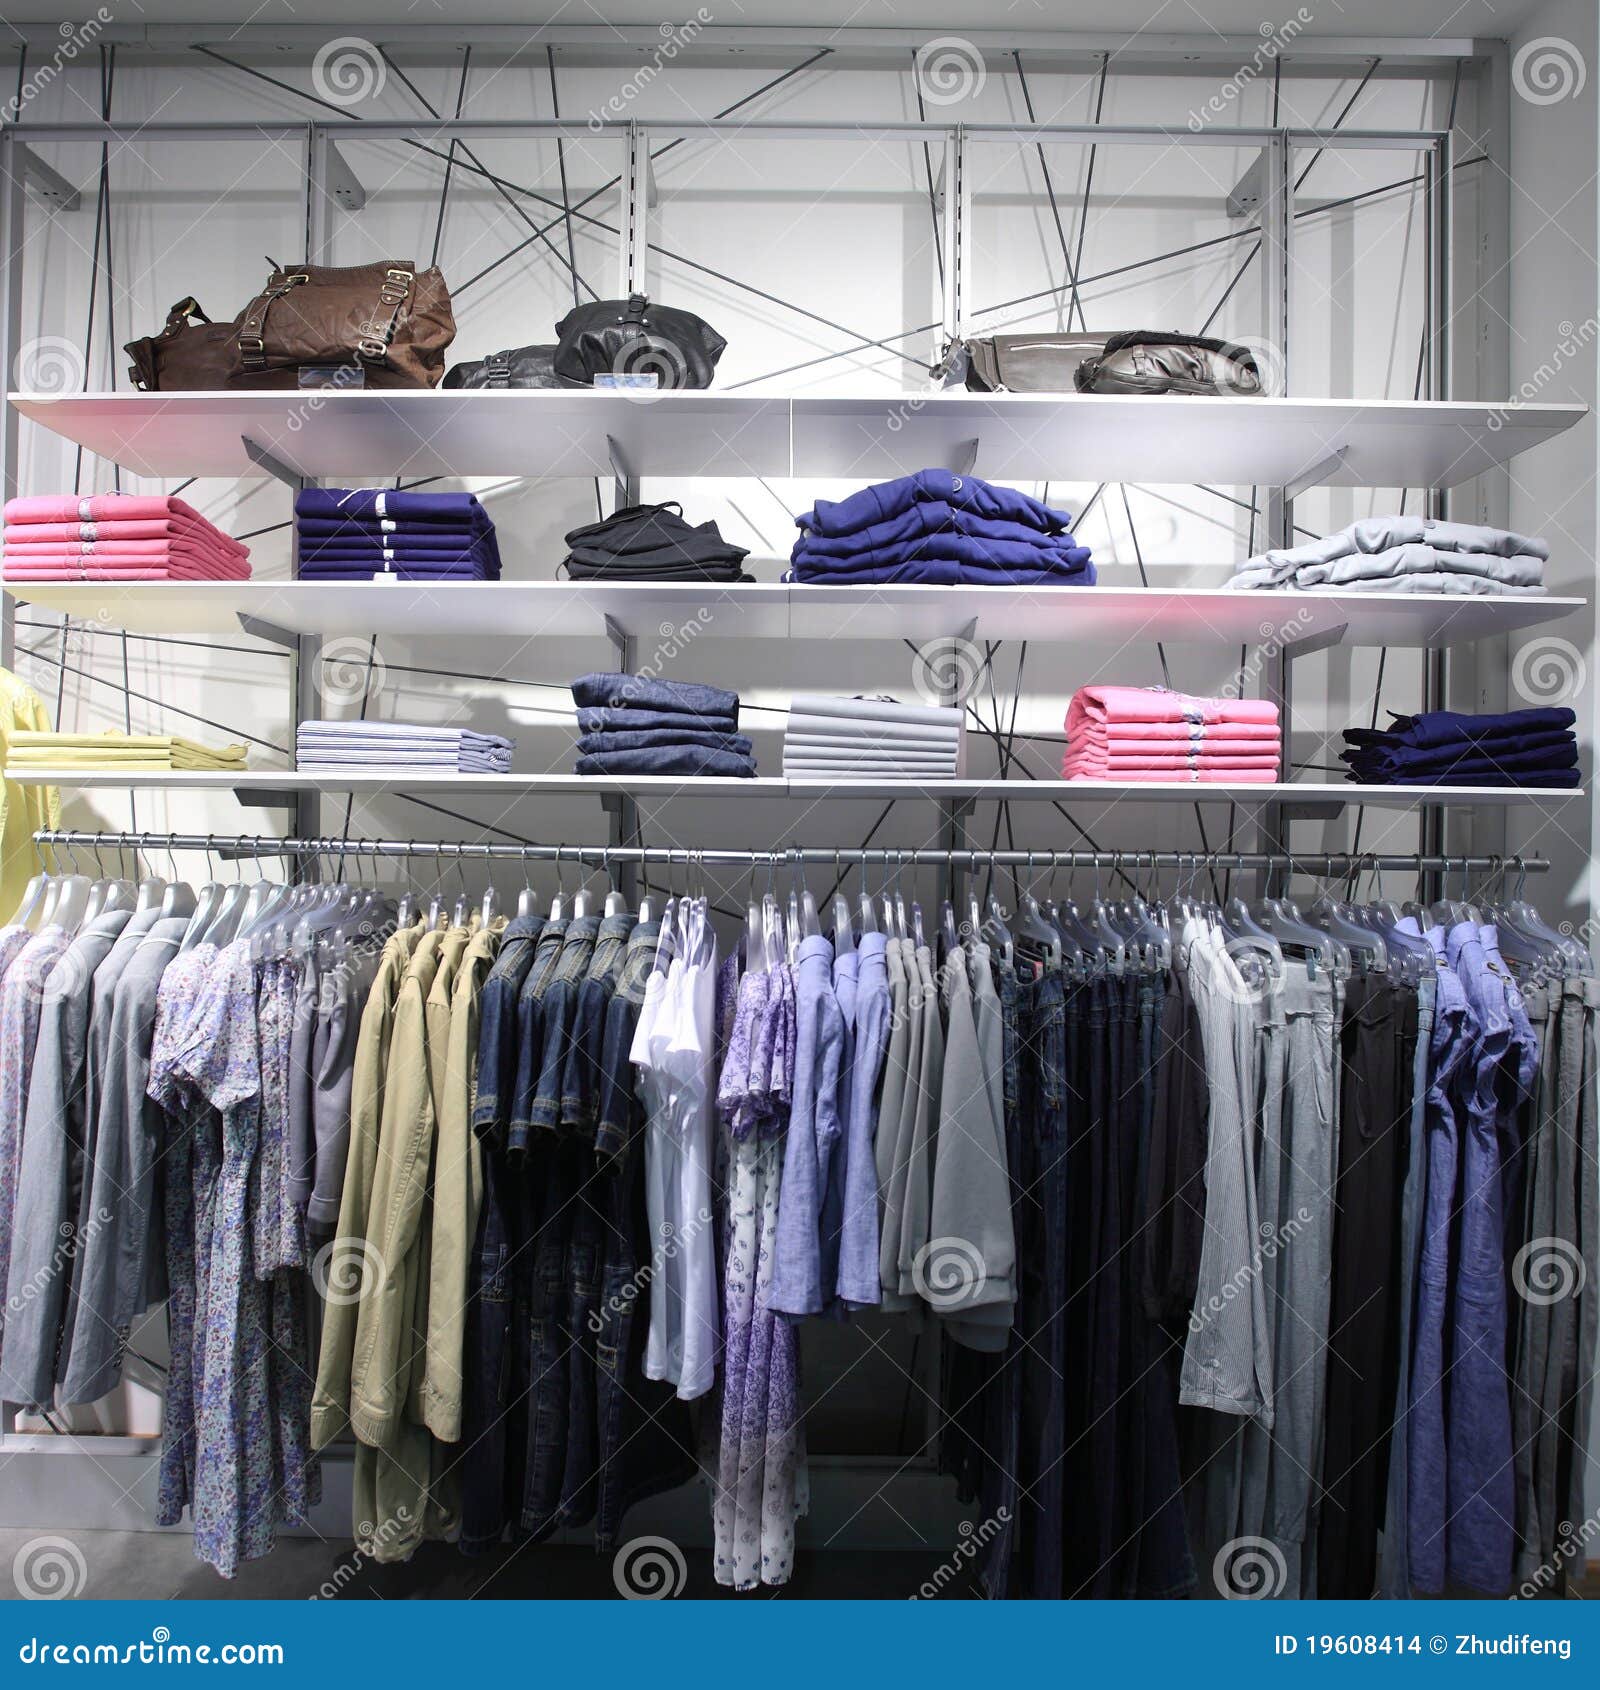 Clothes in the shop stock photo. Image of boutique, hangers - 19608414